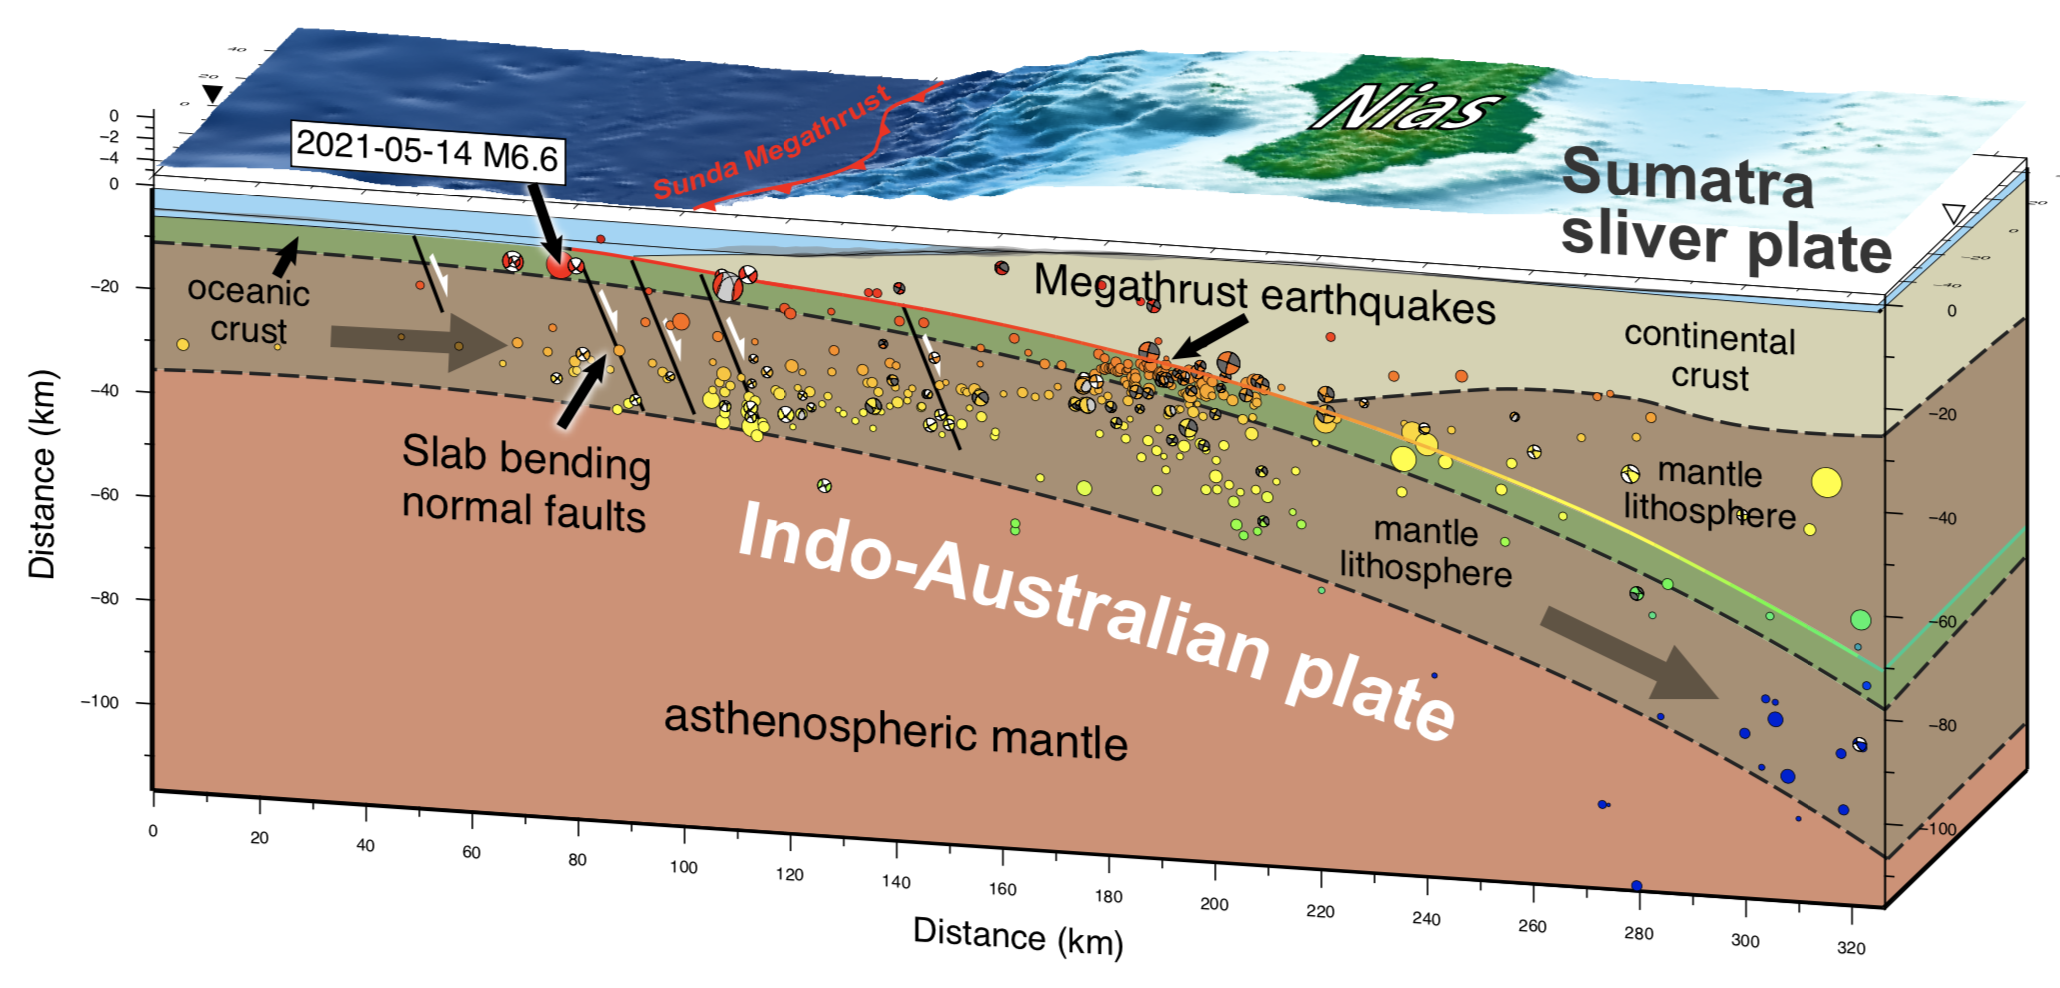 Cross section of the subduction zone showing the location of the 14 May 2021 Mw 6.6 event as well as the regional seismicity. The Sumatra sliver plate is a small tectonic plate between the two major Indo-Australian and Eurasian plates. See above figure for the location of the cross section and the legend (Source: Kyle Bradley/Earth Observatory of Singapore)